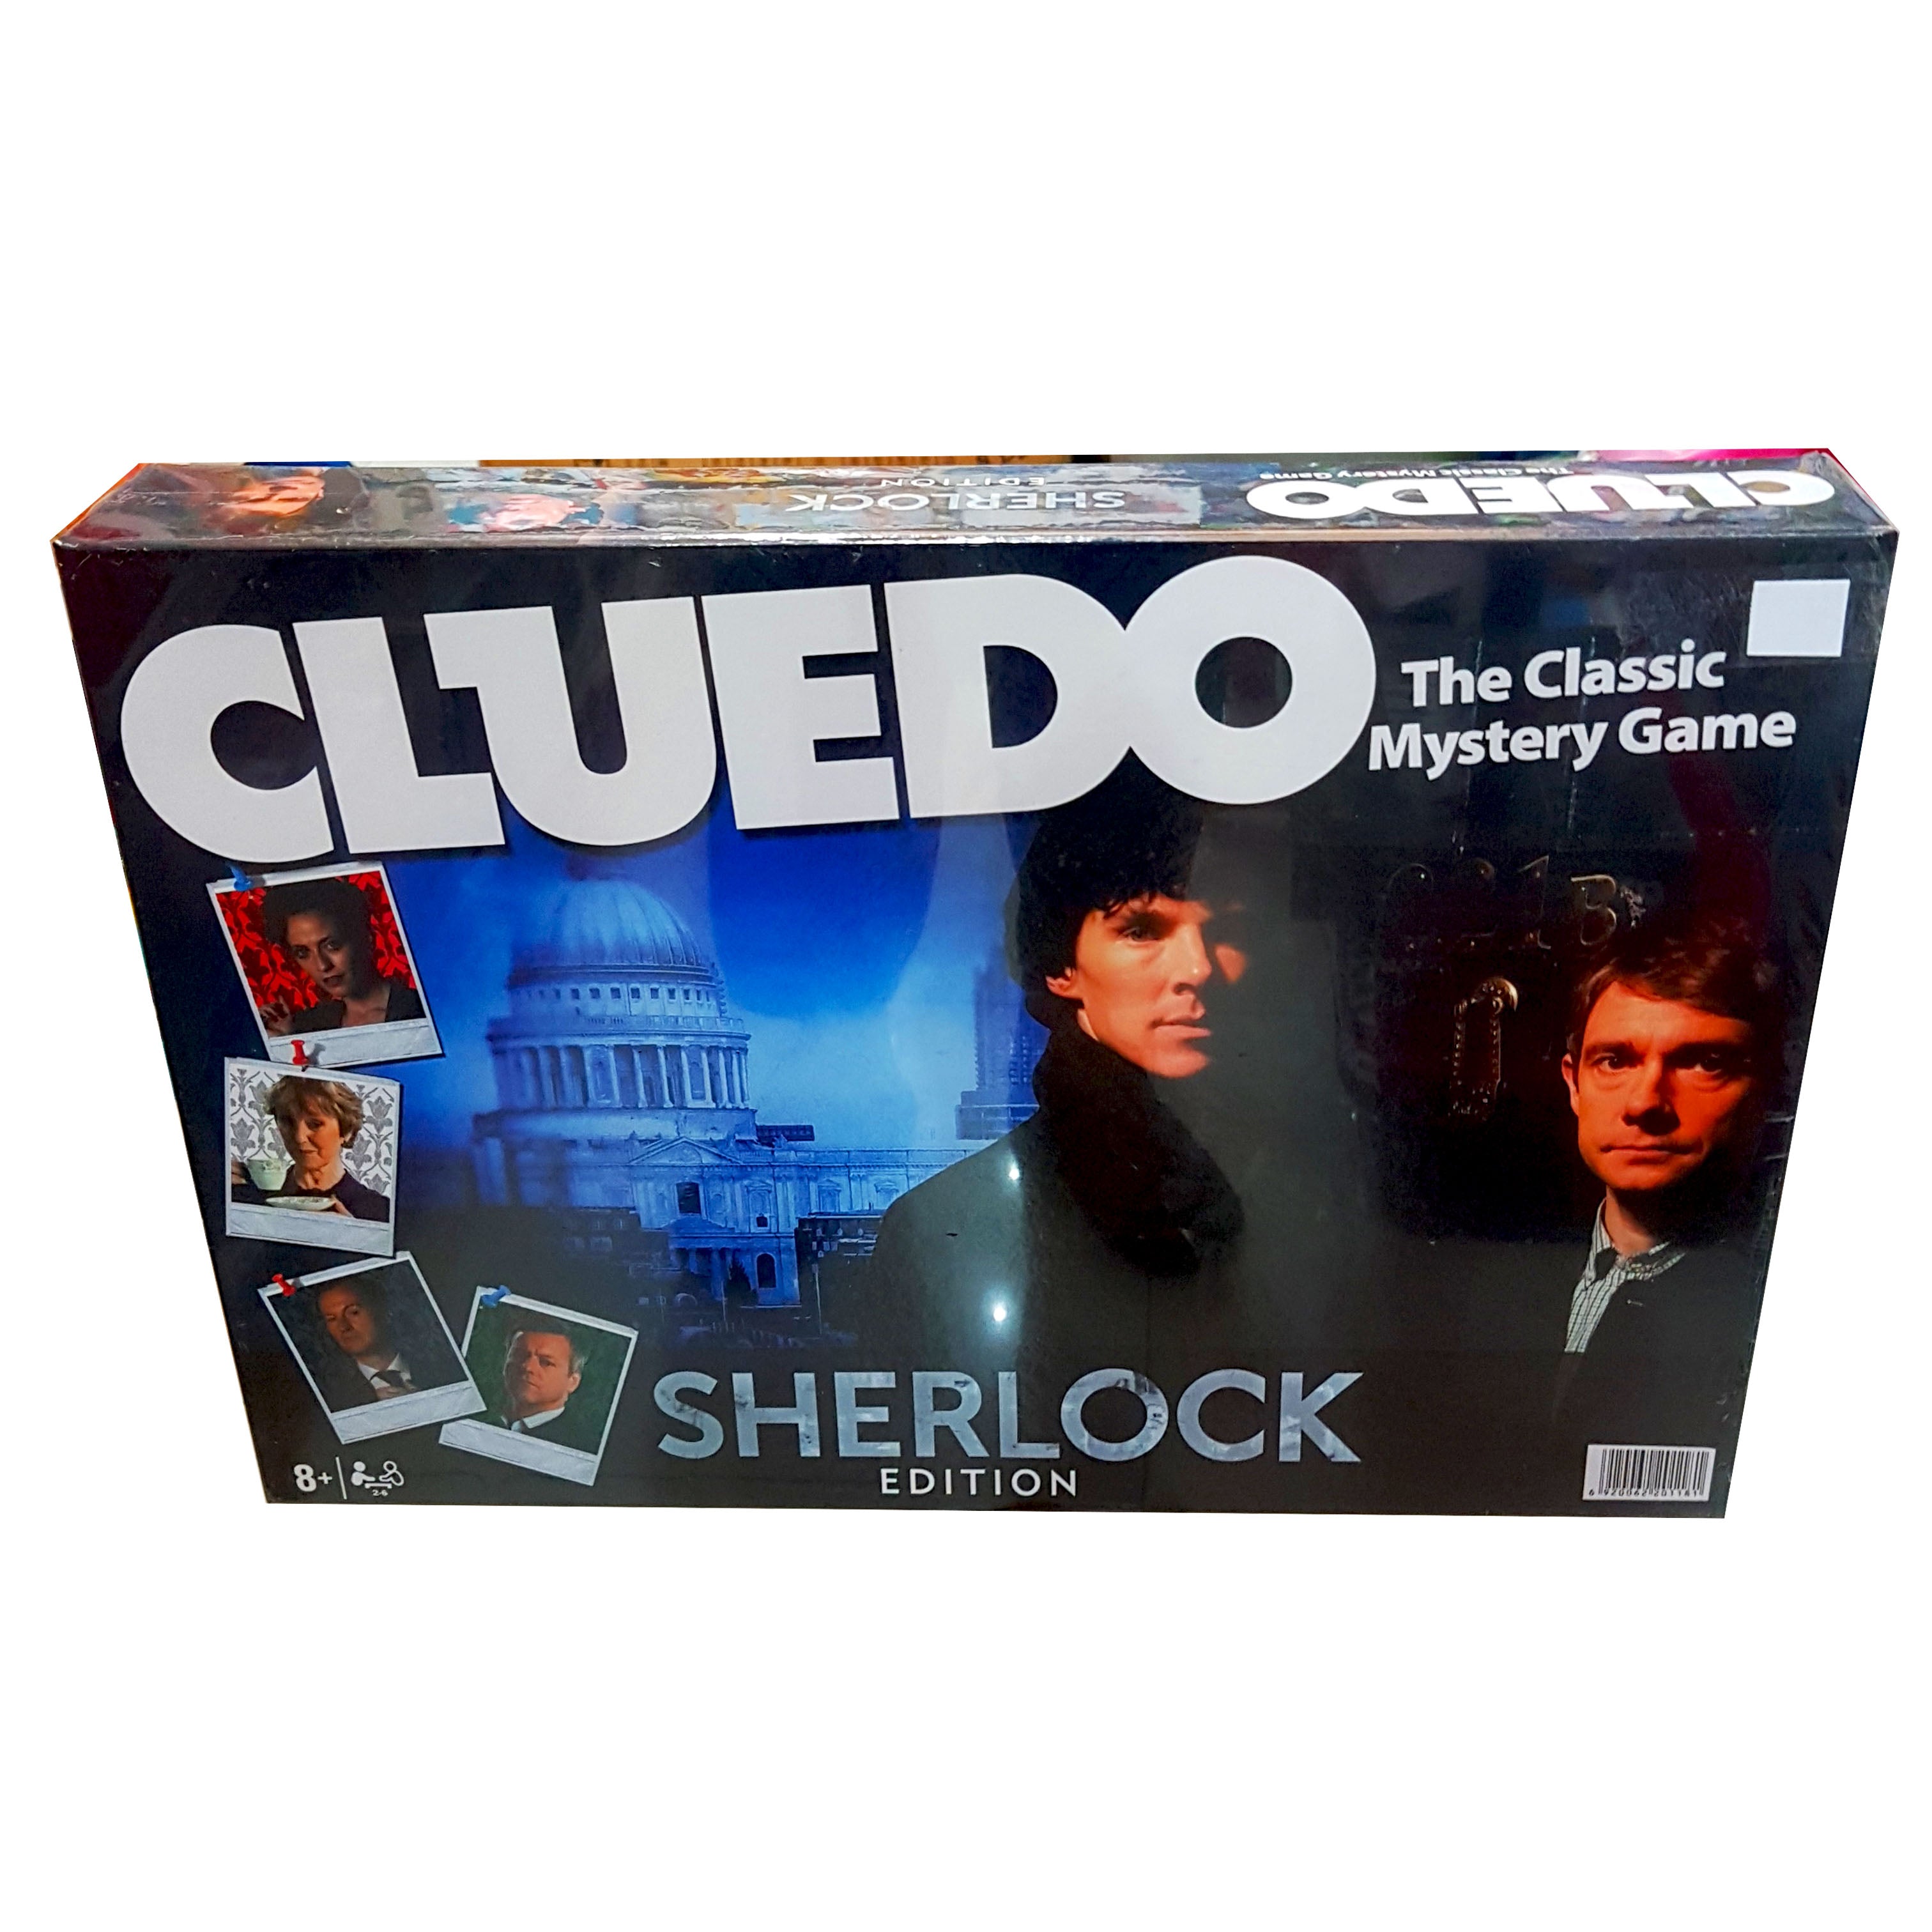 Cluedo Sherlock Edition: Classic Mystery Board Game for 2-6 Players – Featuring Unique Suspect Cards, Miniature Weapons, Detective Notebook, and Immersive Gameplay